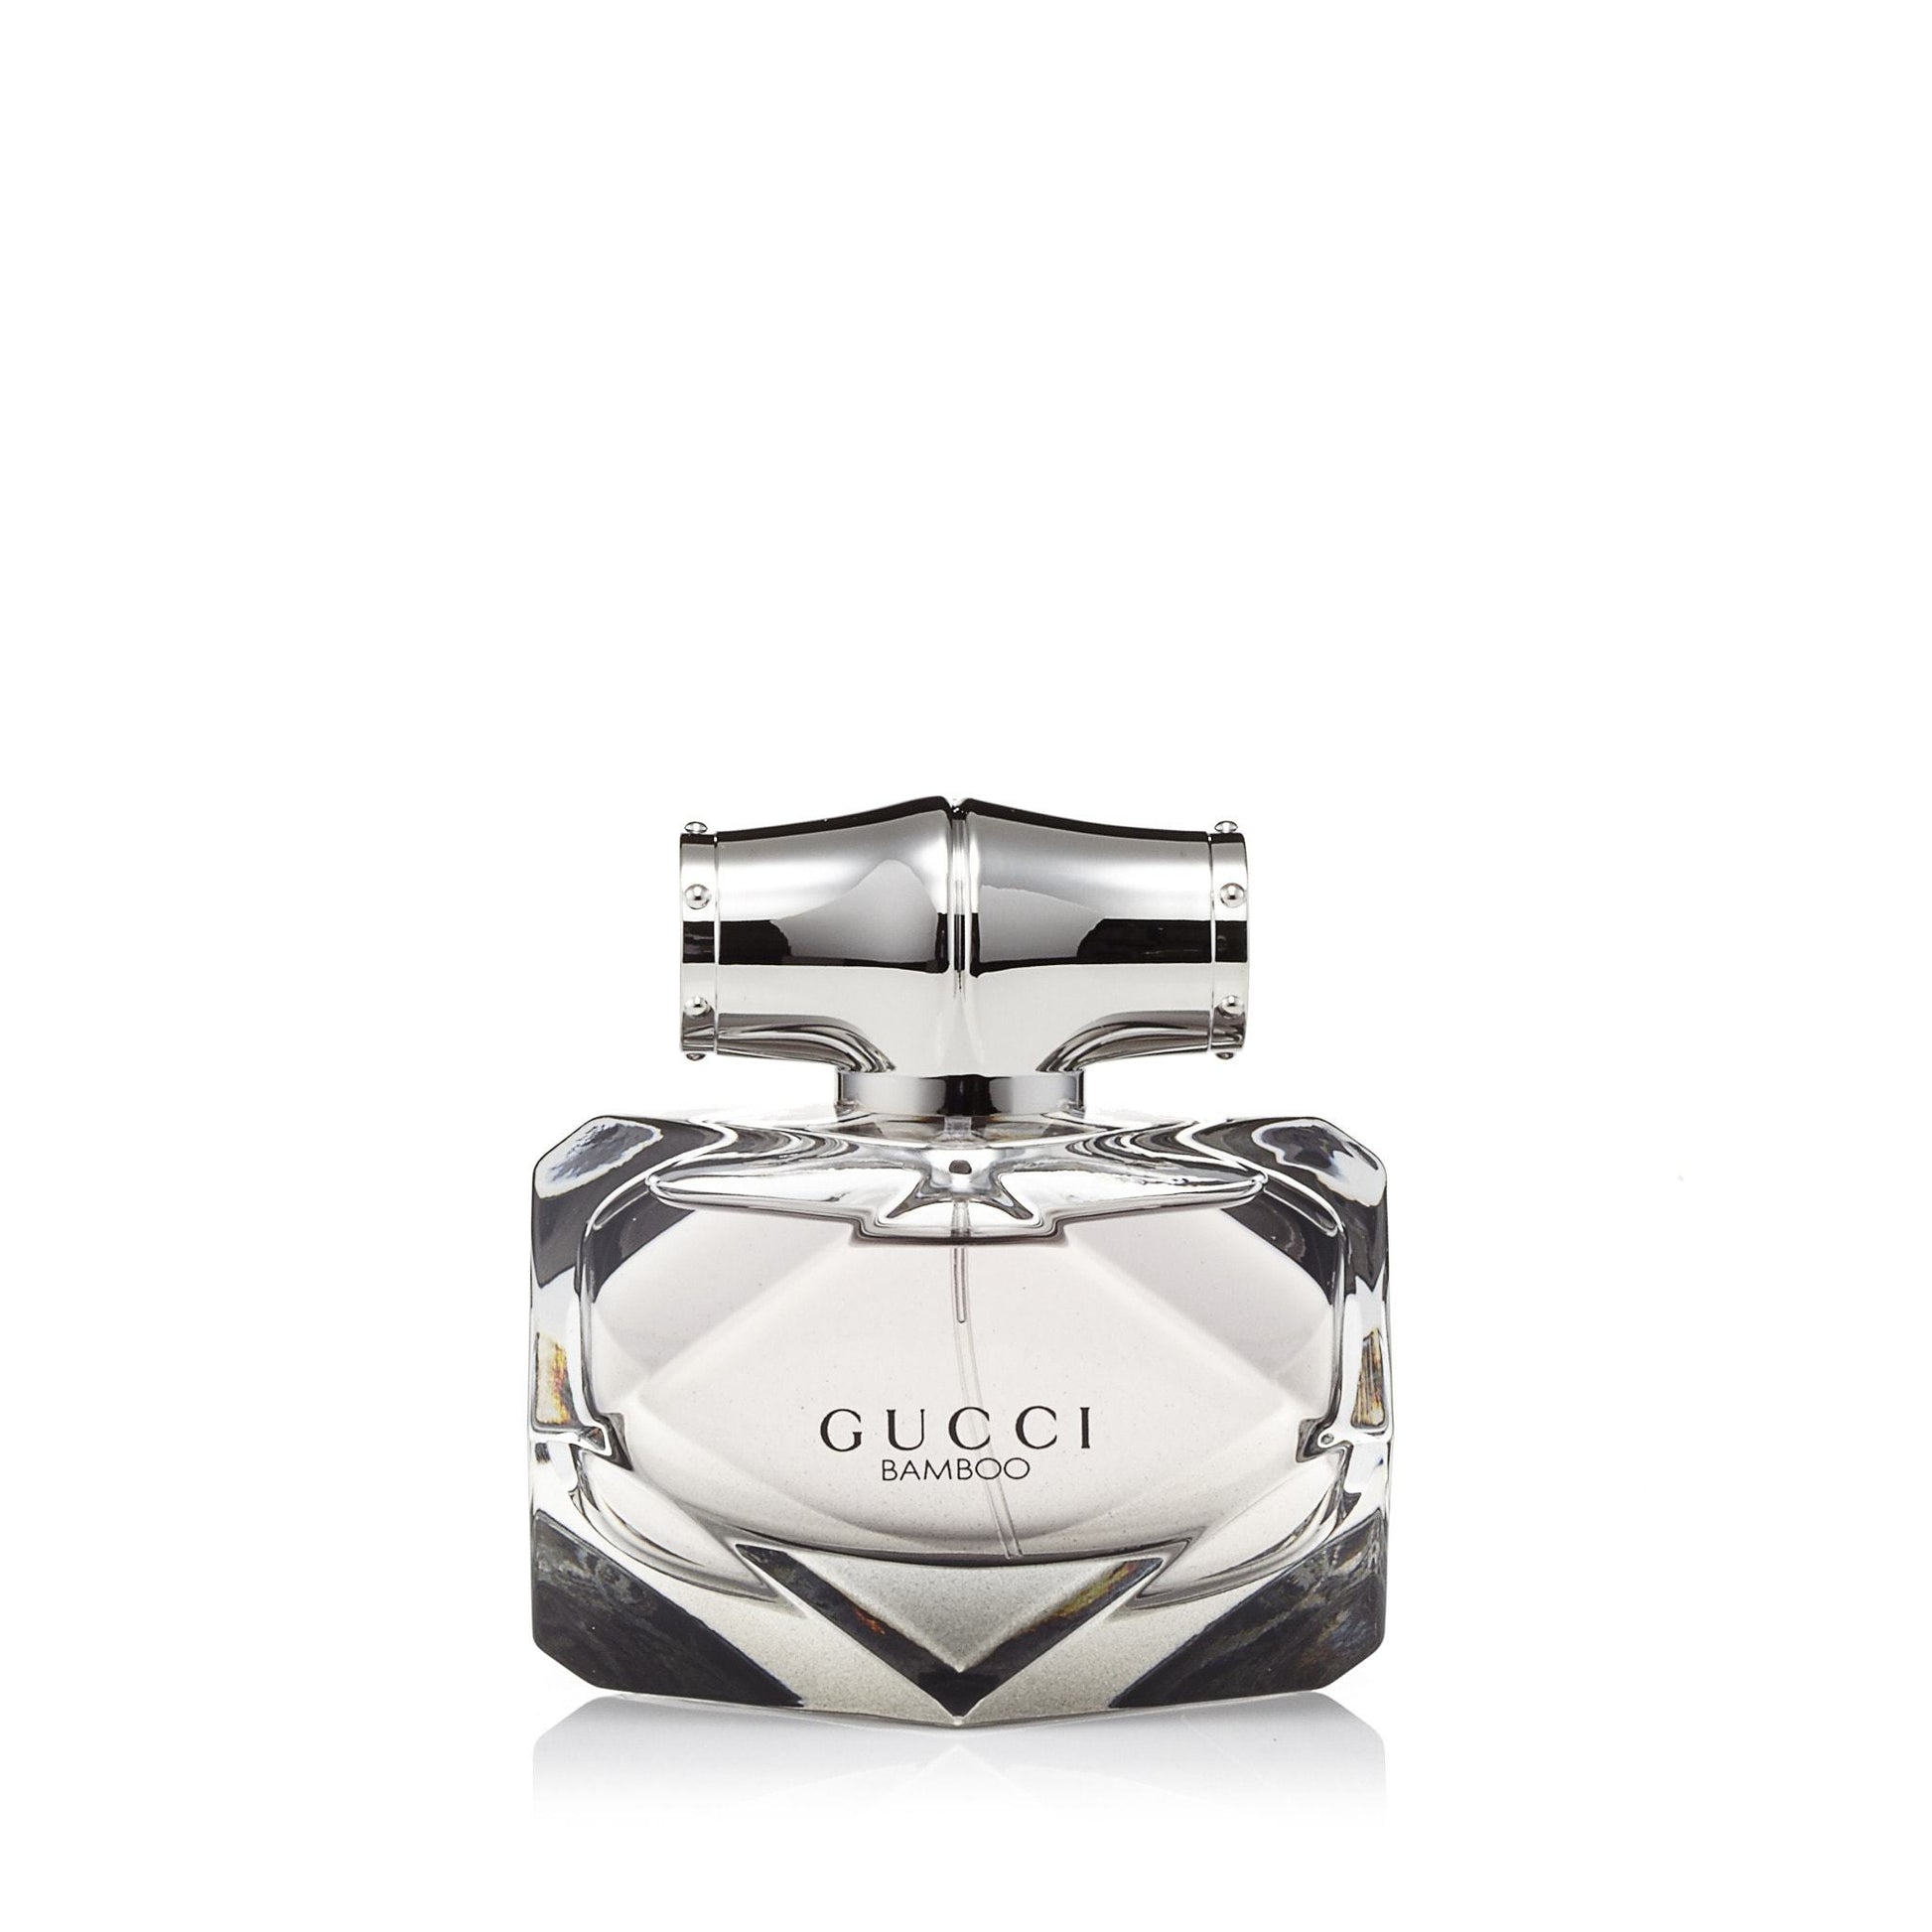 Bamboo Eau de Parfum Spray for Women by Gucci, Product image 3